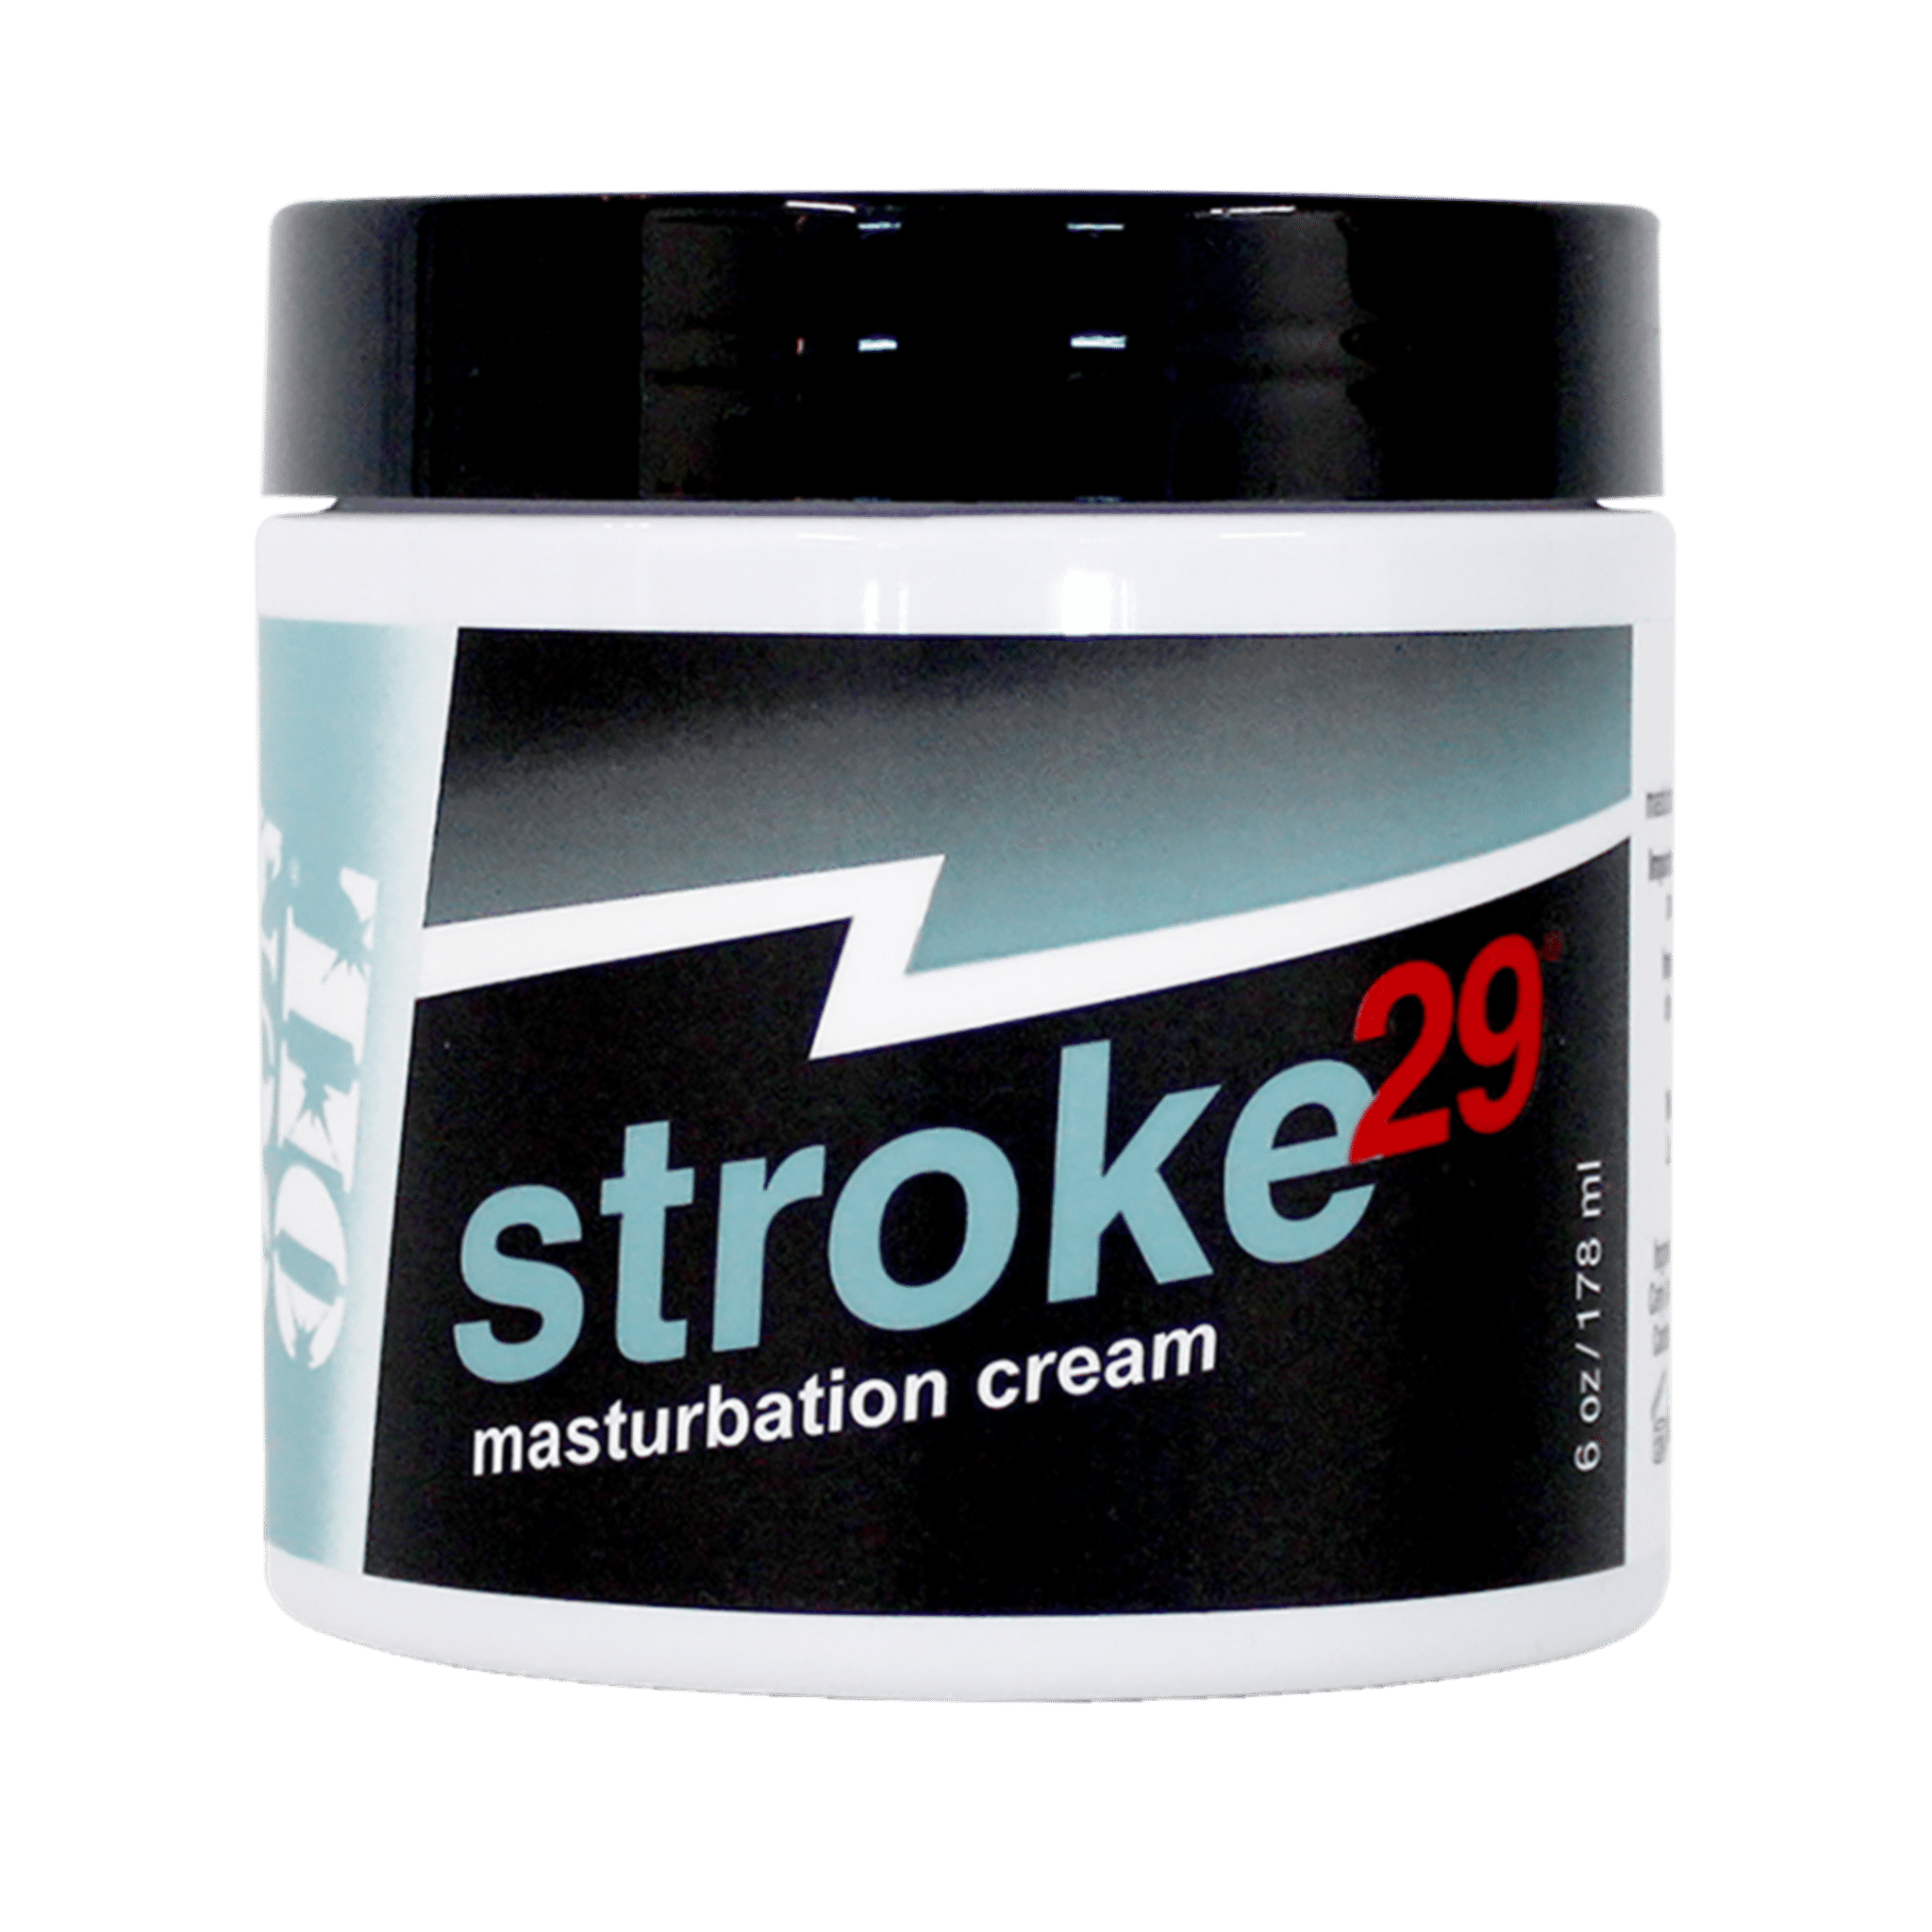 Stroke 29 Personal Lubricant Water And Oil Based Male Masturbation Cream For Him 6oz Jar 